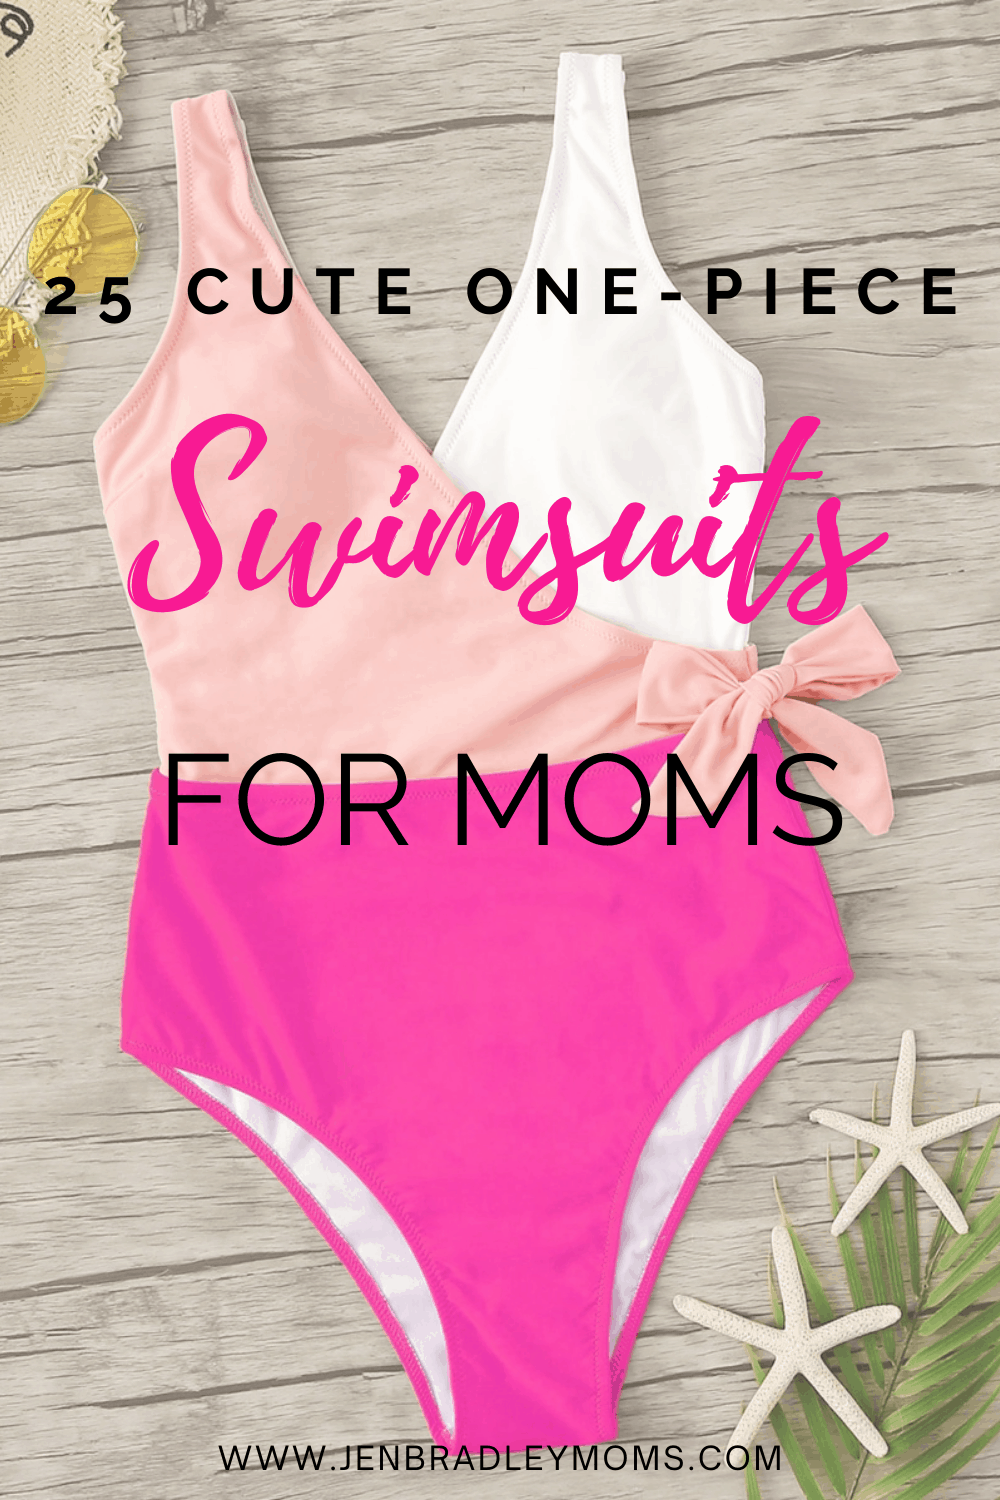 25 Cute One-Piece Modest Swimsuits for Moms in 2021